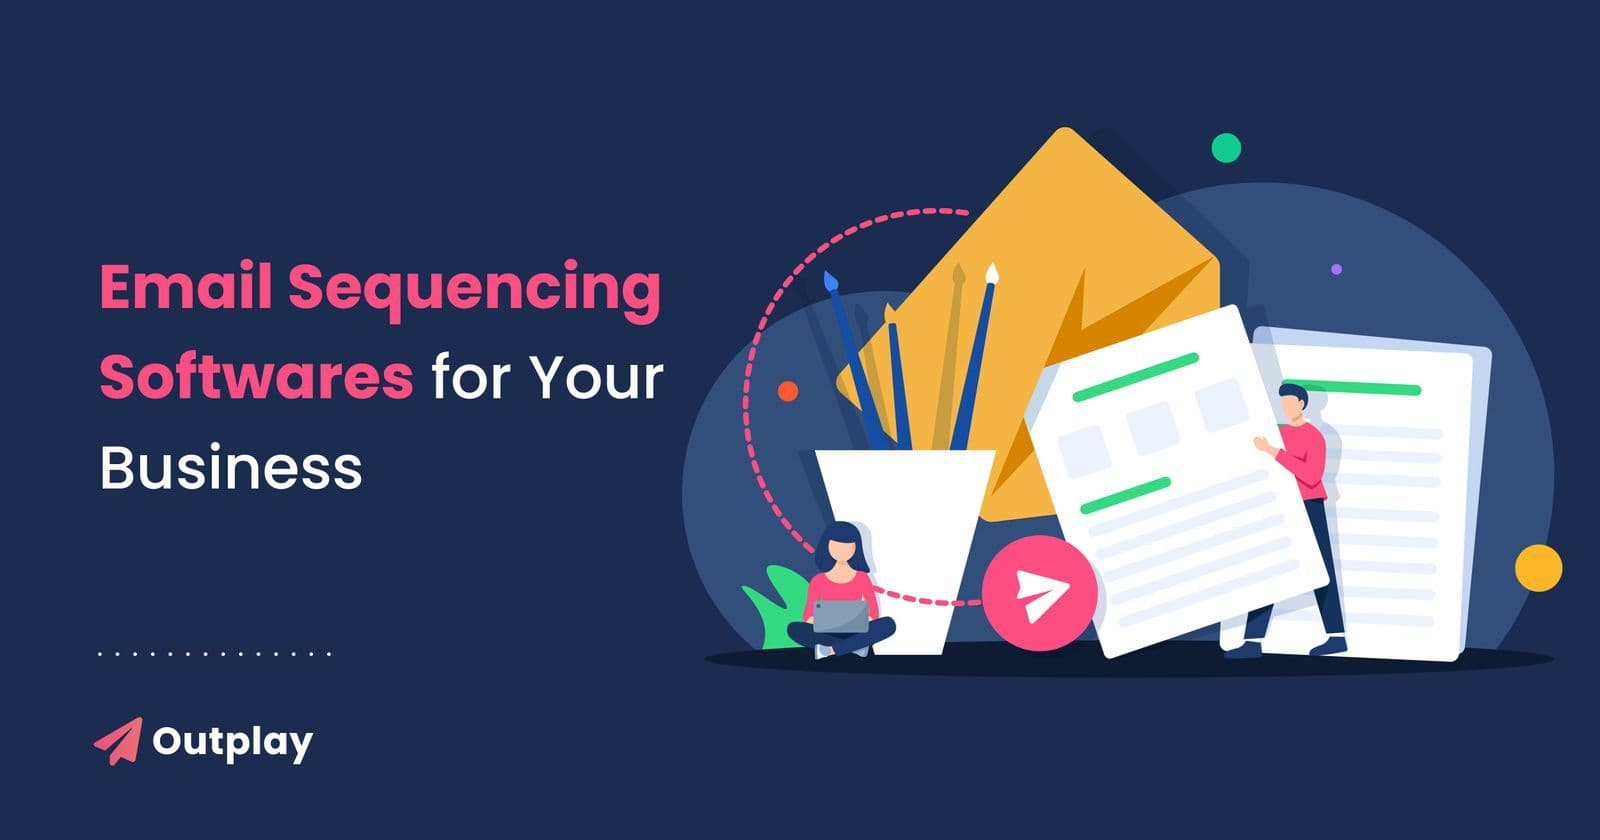 Email Sequencing Software